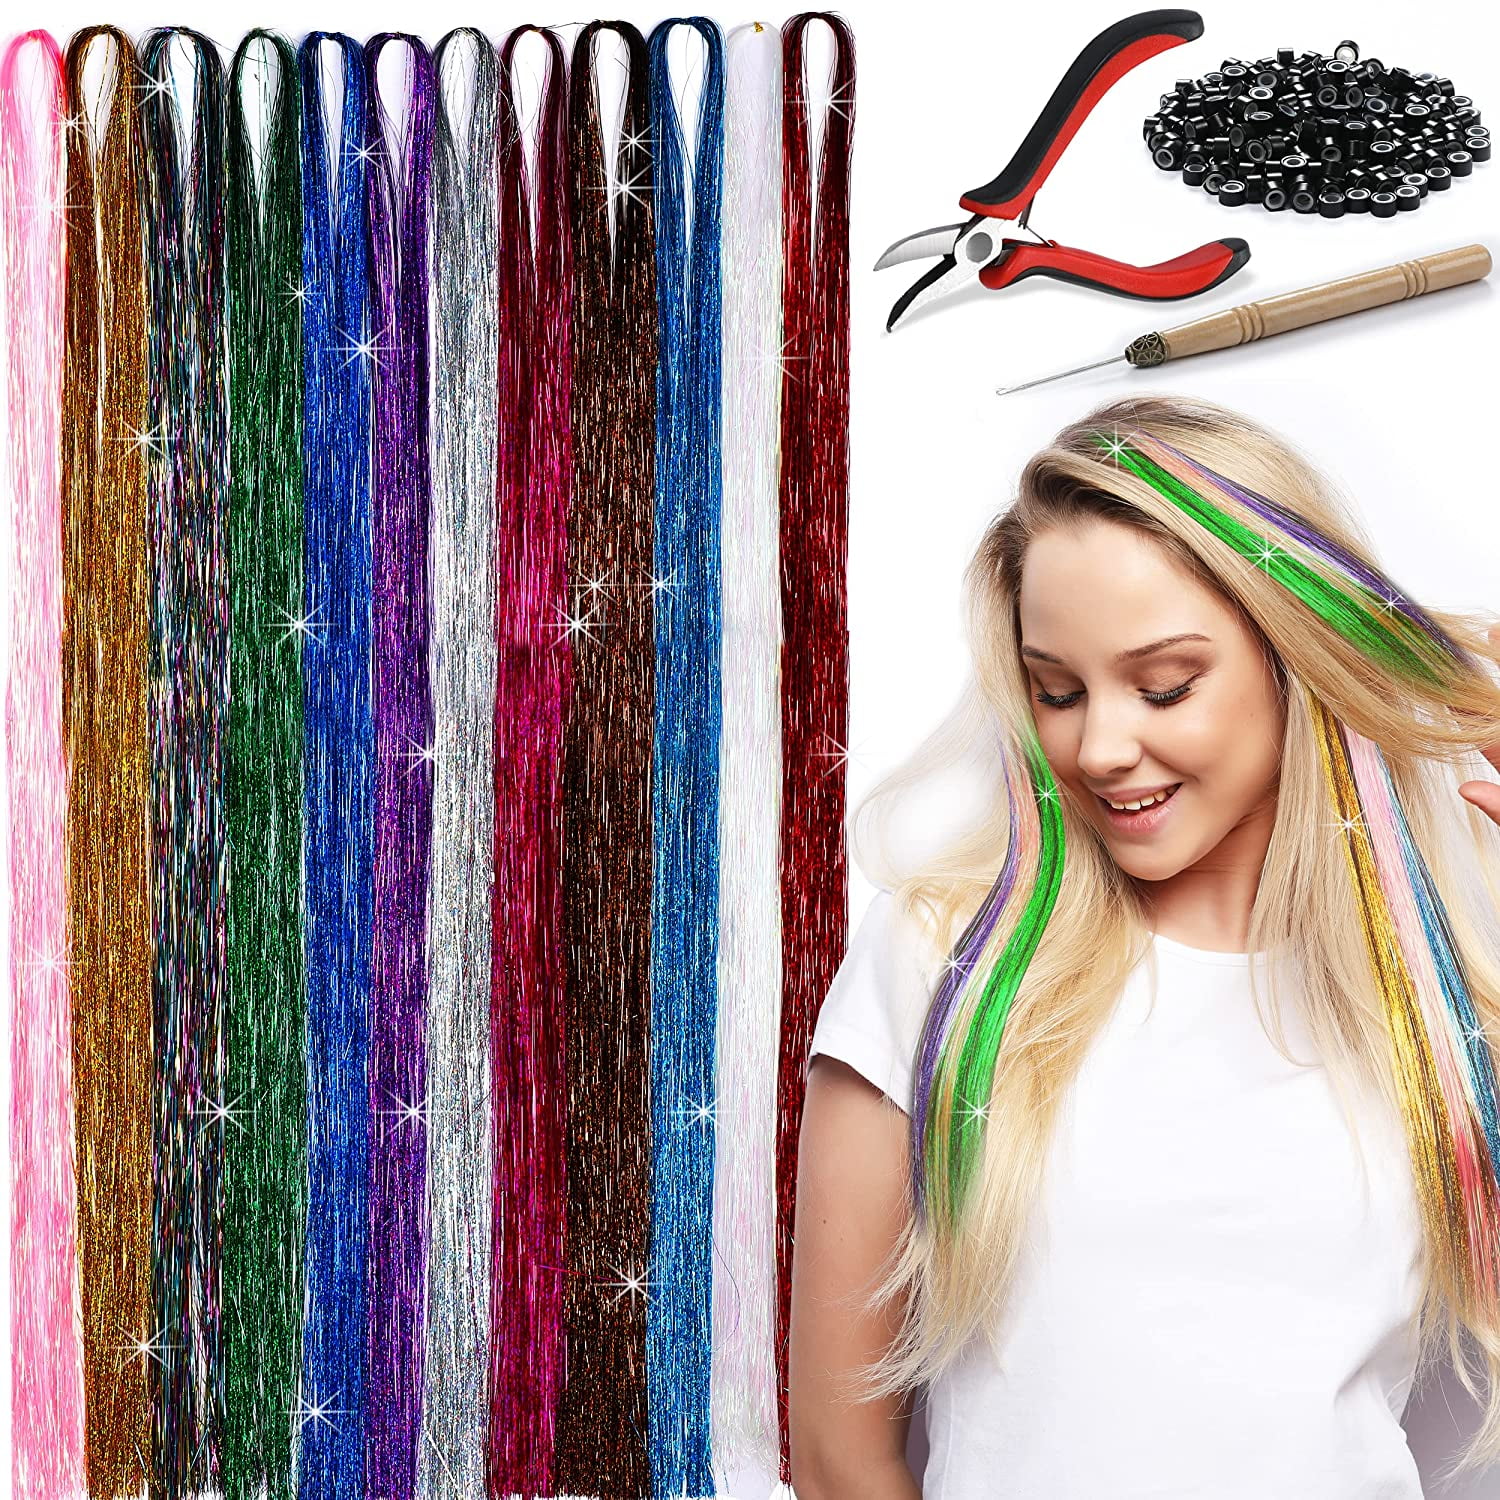 Hair Tinsel Kit with Tools 8pcs 1600 Strands Glitter Tinsel Hair Extensions, Human Hair Extensions Heat Resistant Highlights Sparkling Fairy Hair